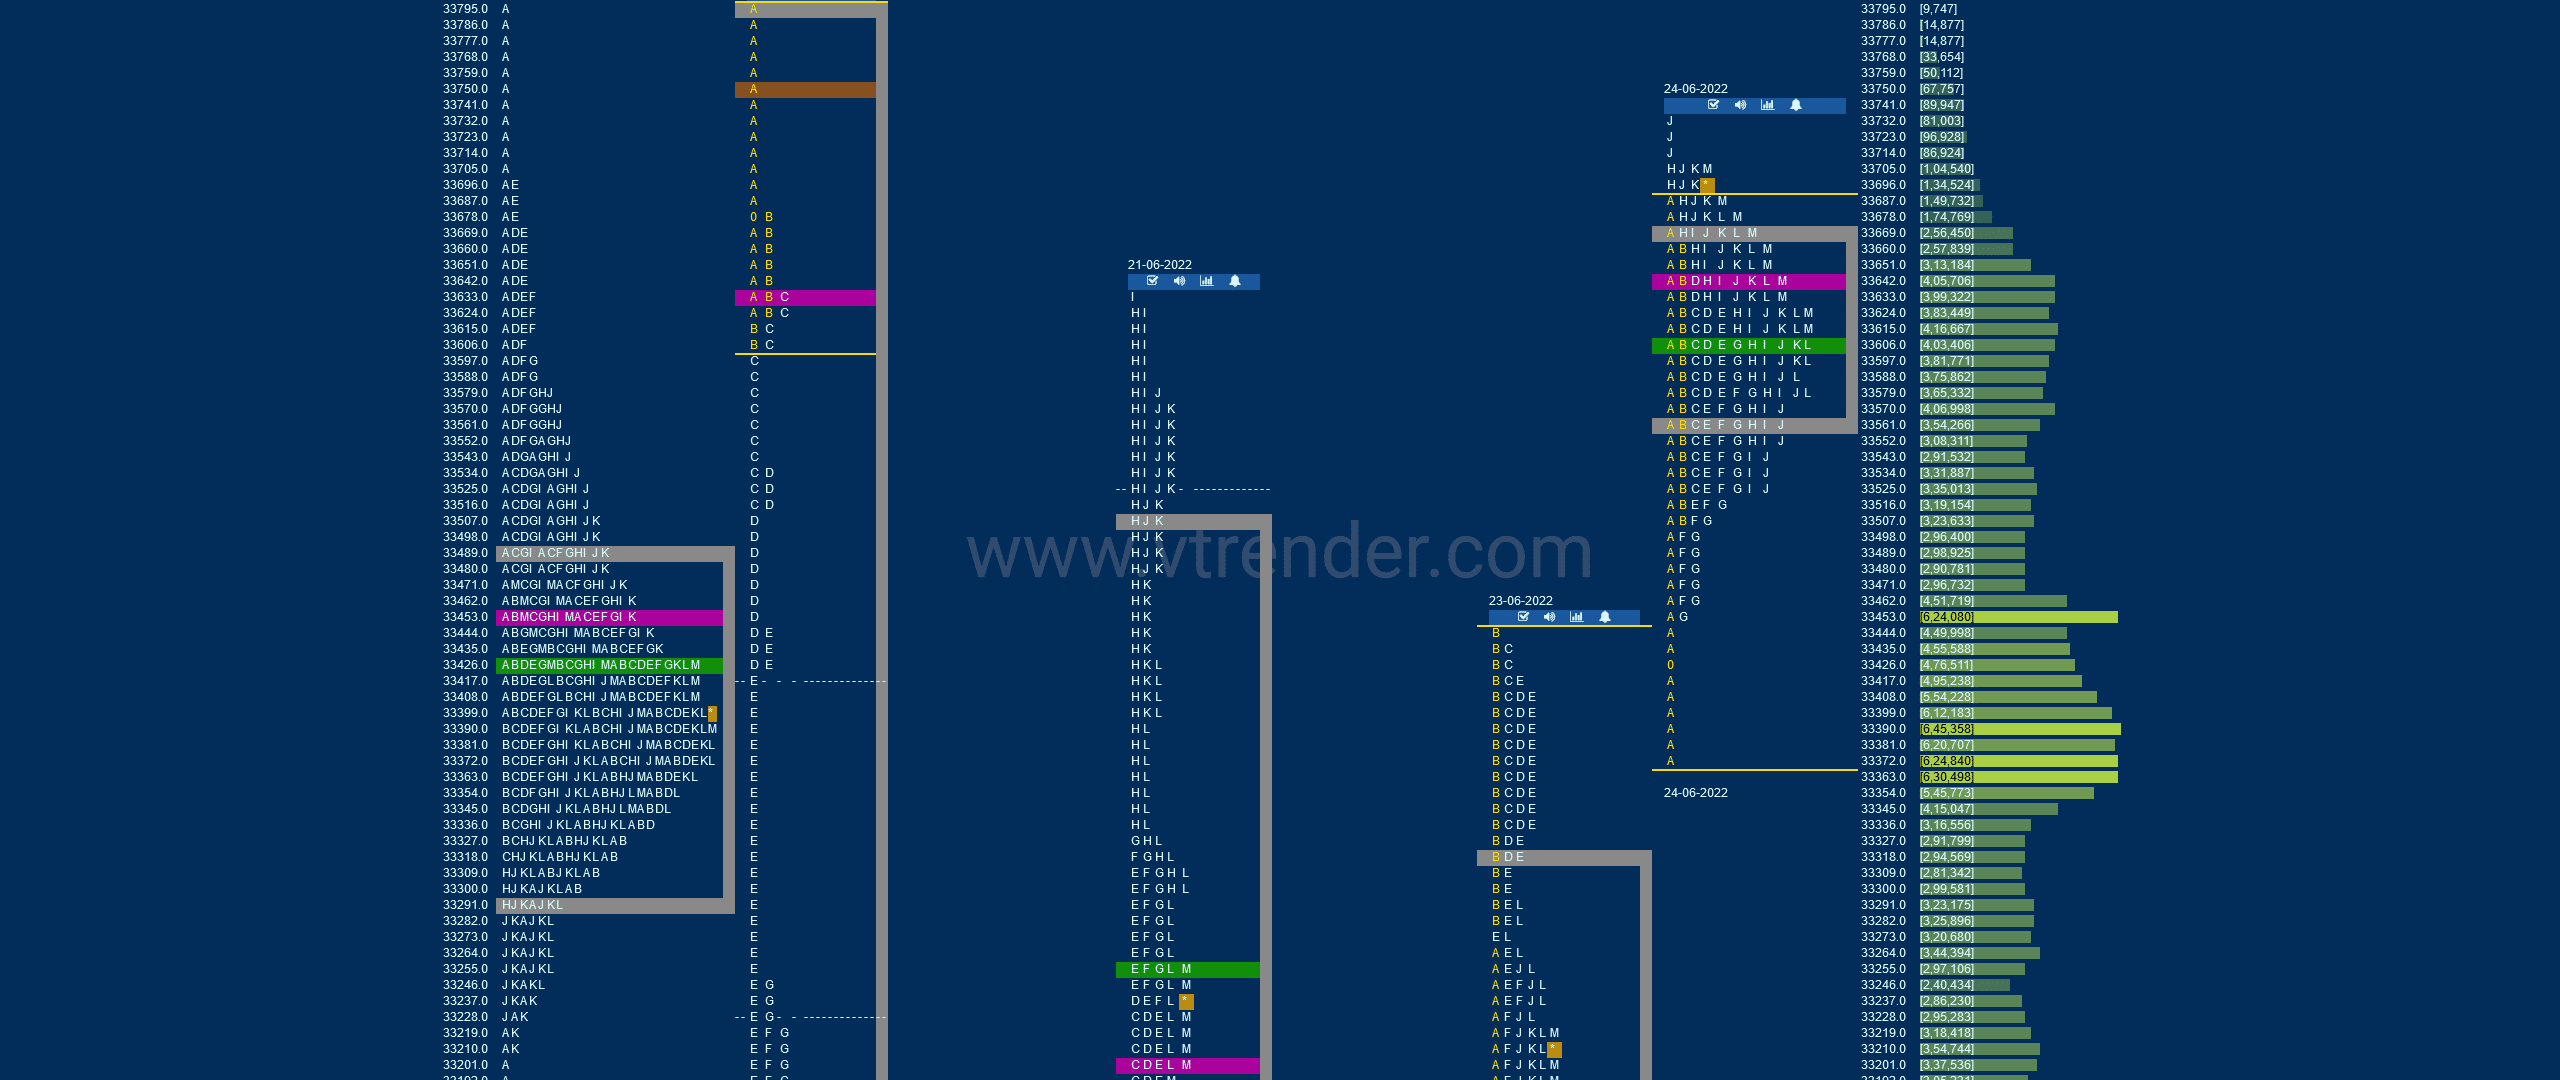 Bnf 18 Market Profile Analysis Dated 24Th Jun 2022 Banknifty Futures, Charts, Day Trading, Intraday Trading, Intraday Trading Strategies, Market Profile, Market Profile Trading Strategies, Nifty Futures, Order Flow Analysis, Support And Resistance, Technical Analysis, Trading Strategies, Volume Profile Trading